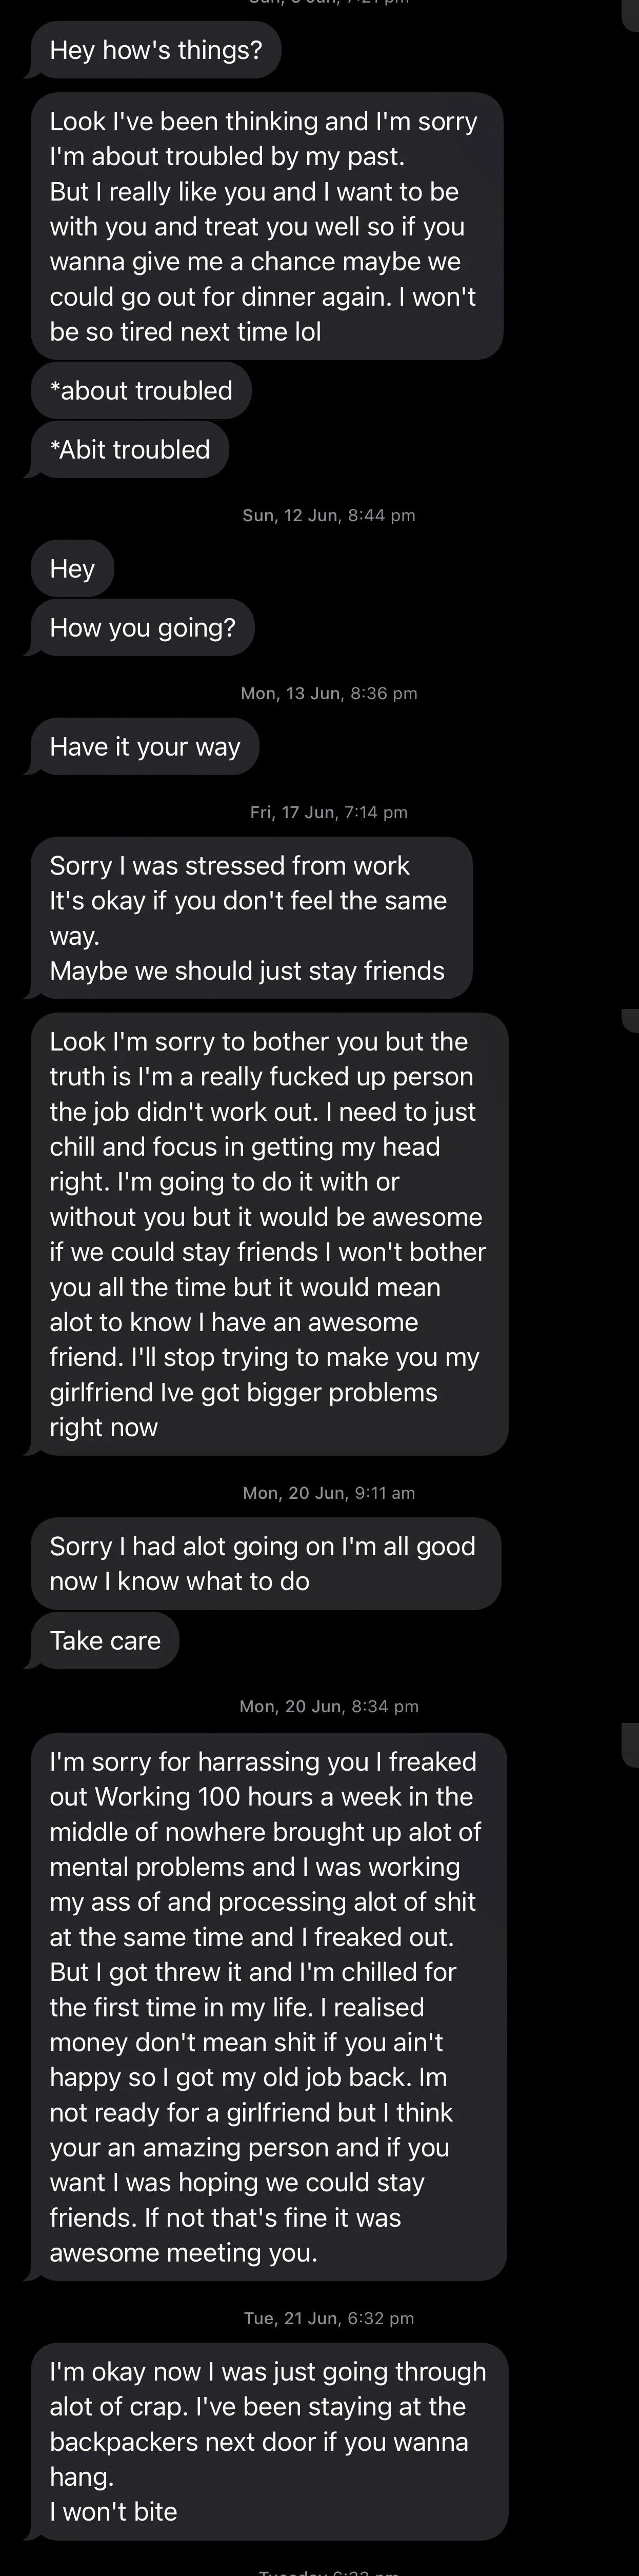 A person sends more than 10 messages over the course of two weeks without a response, revealing they&#x27;ve been dealing with poor mental health, first trying to go out on a date, then trying to stay friends